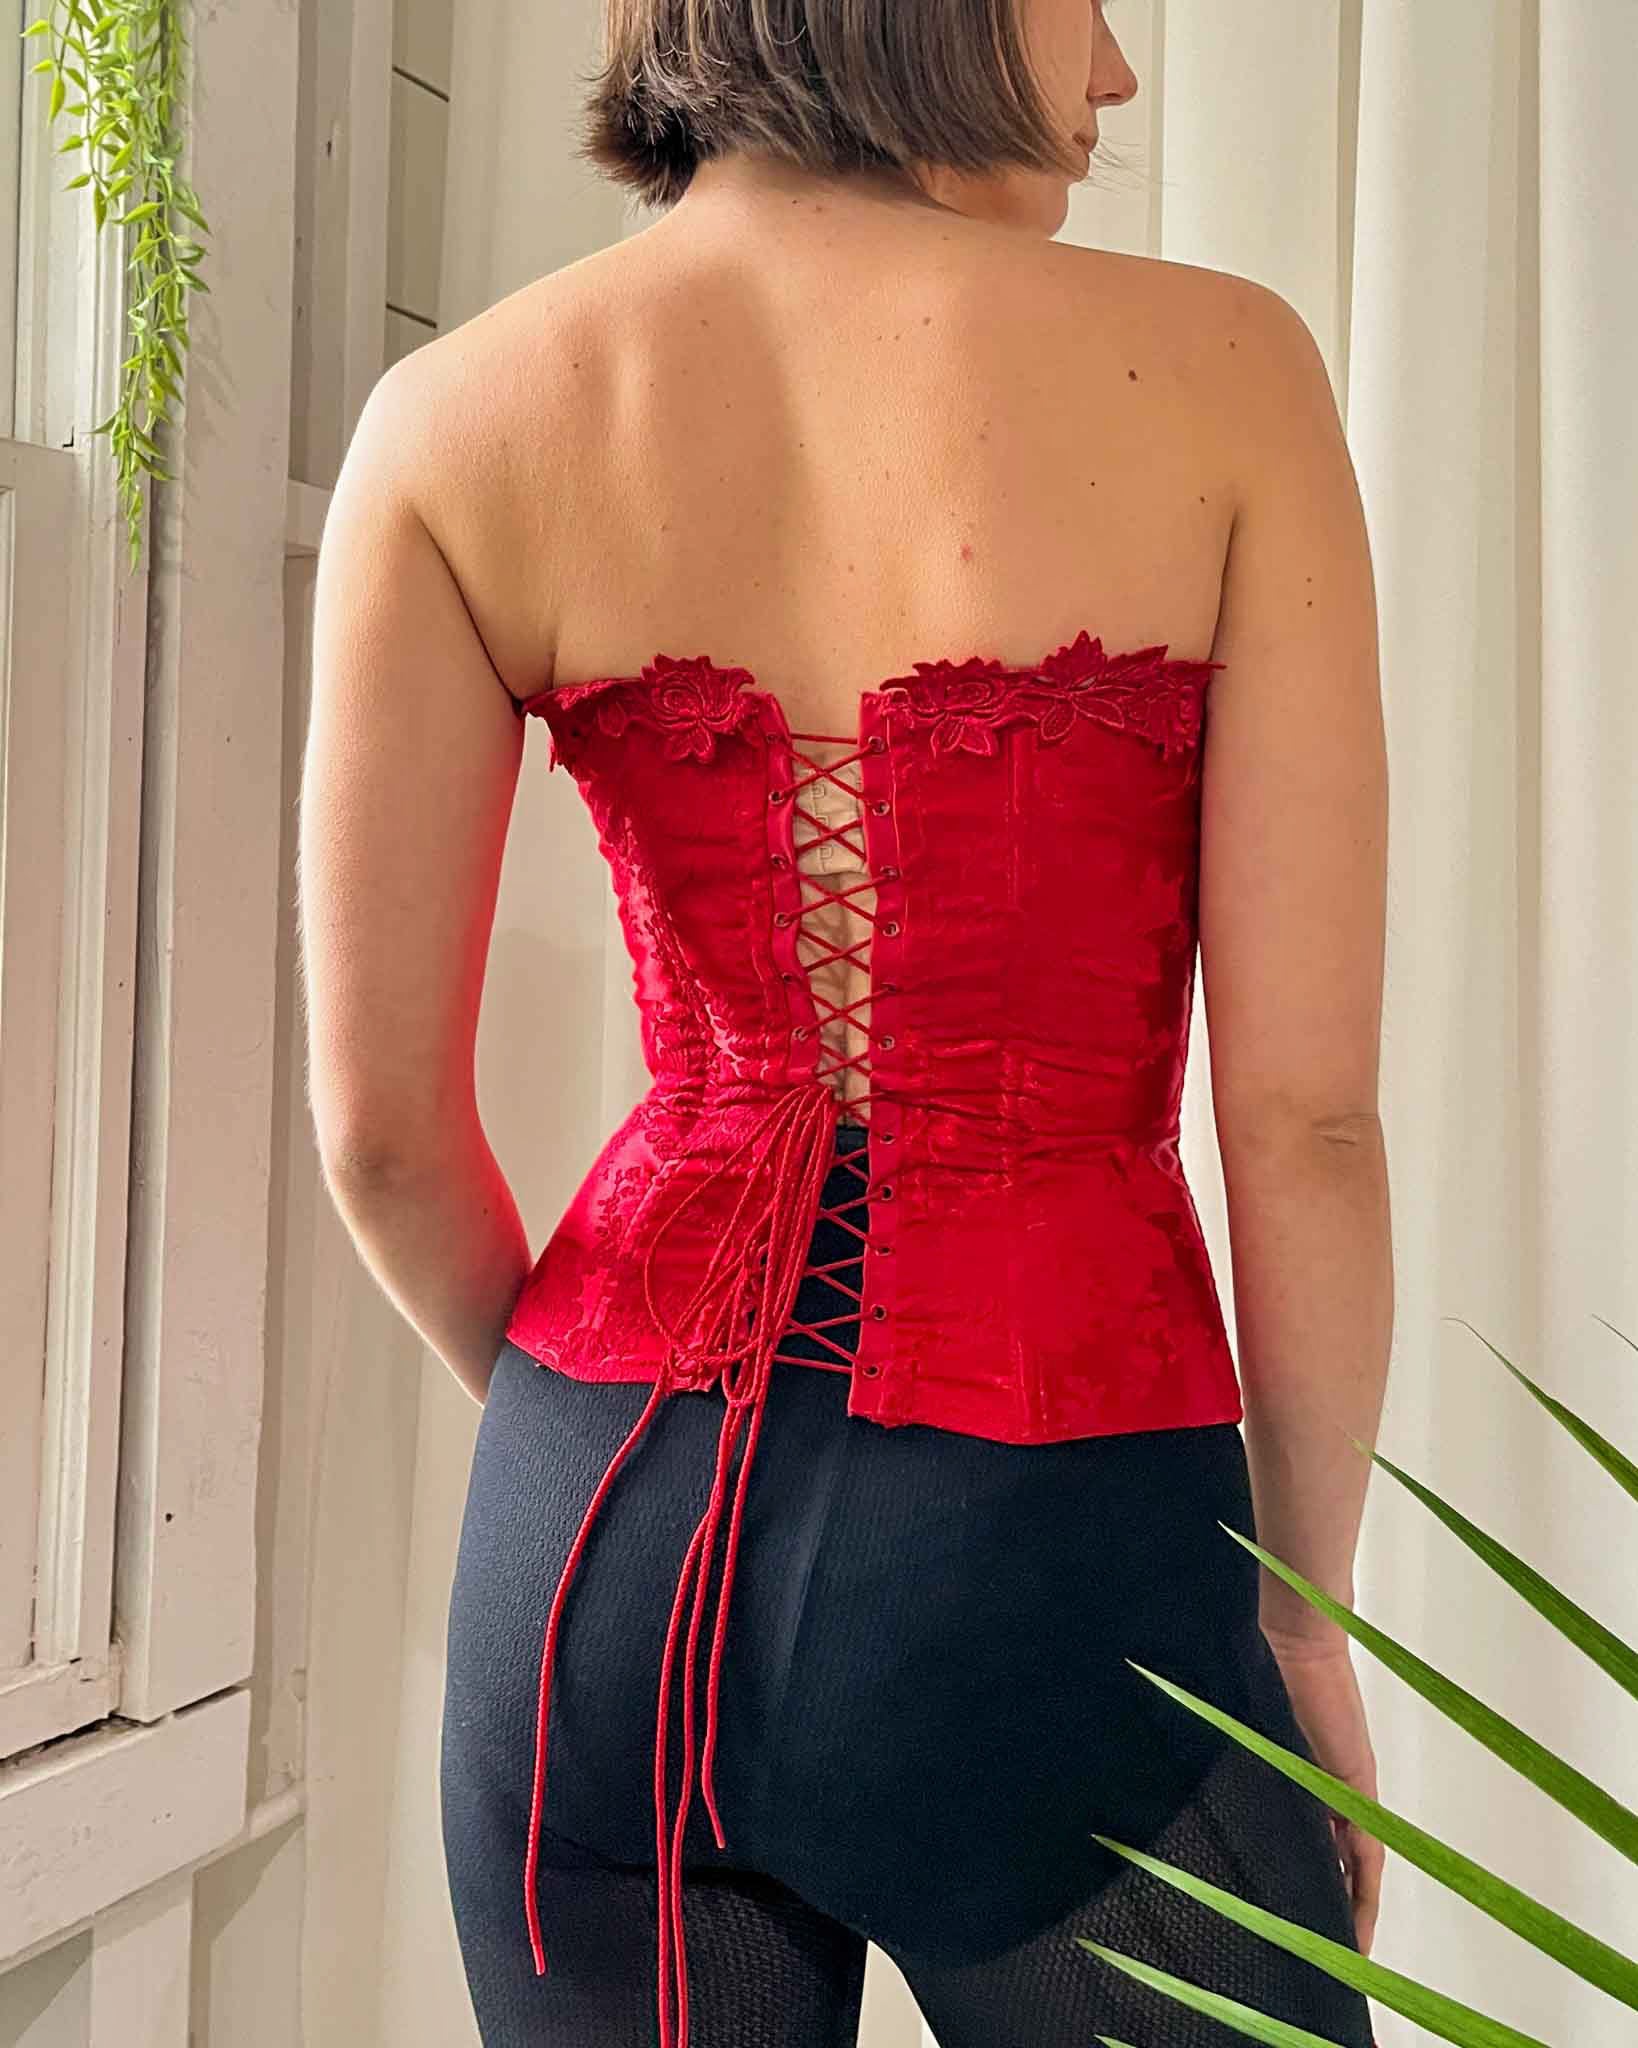 90s Red Brocade Corset - Lucky Vintage